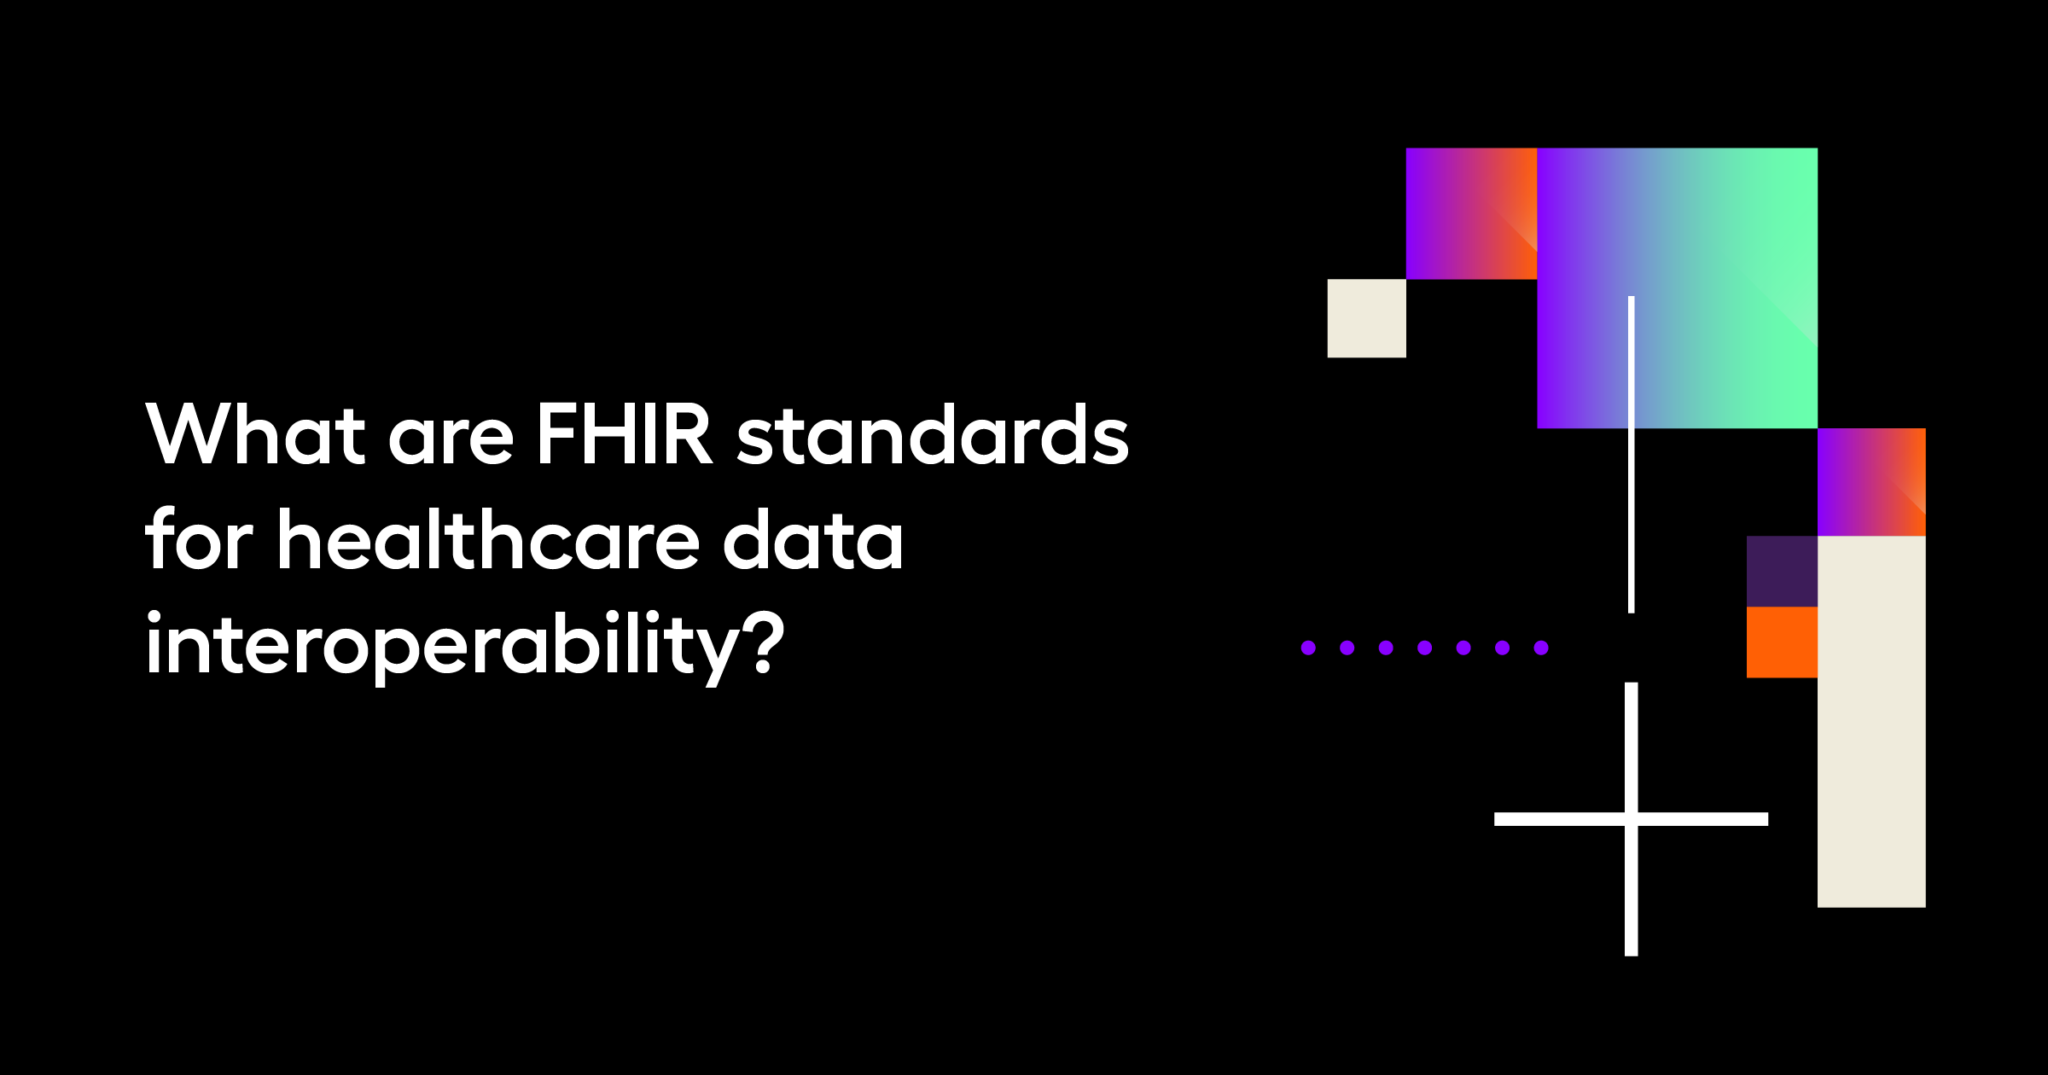 What are FHIR standards for healthcare data interoperability?